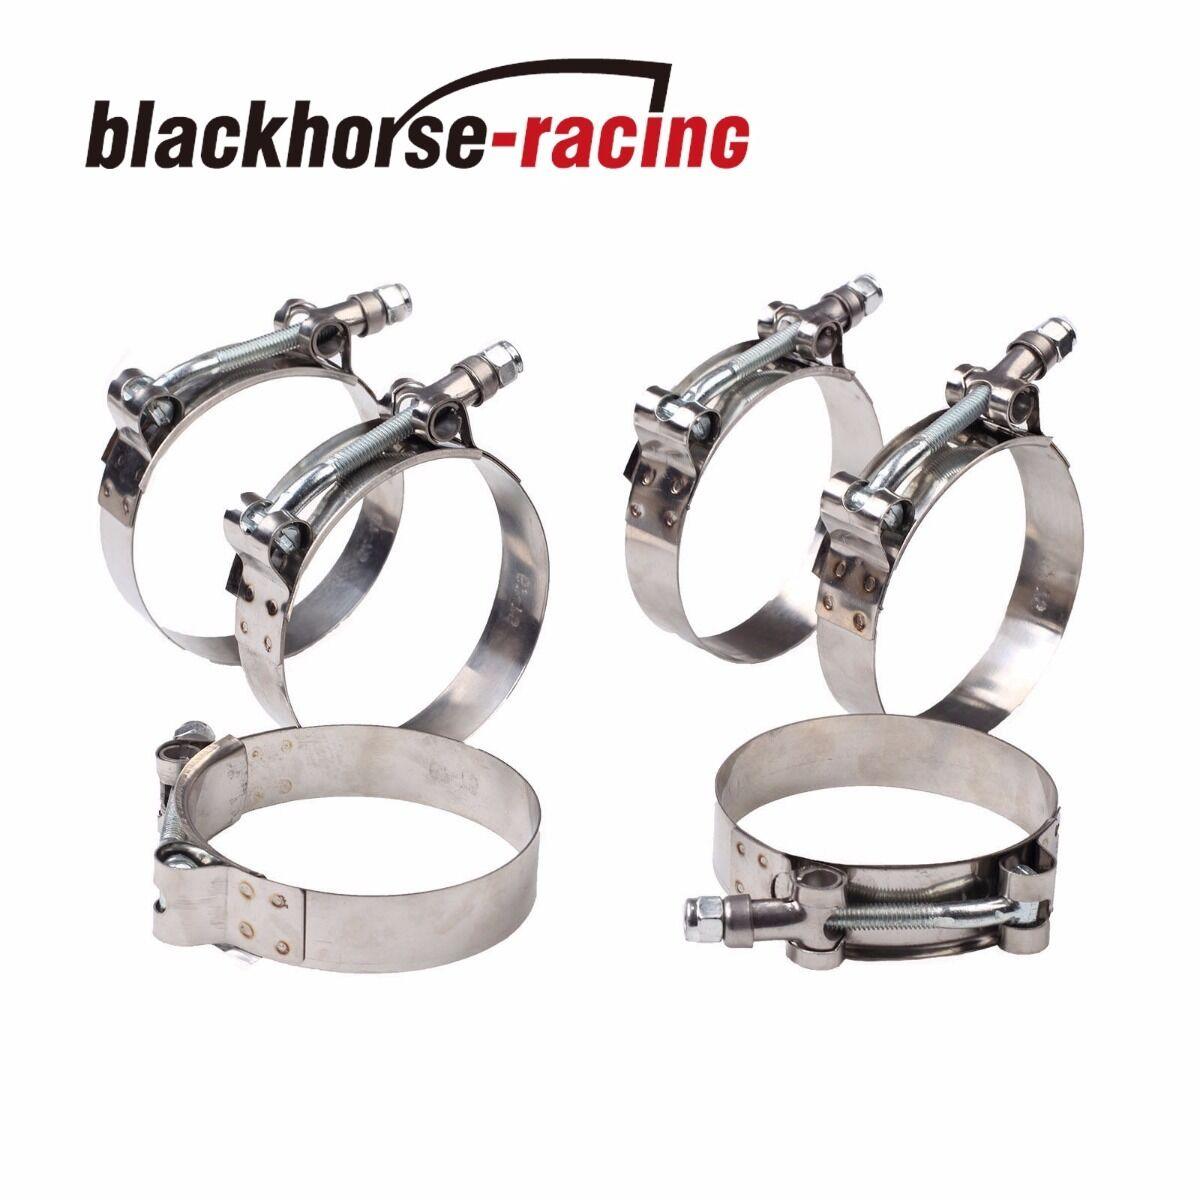 6PC For 2-3/8'' Hose (2.64"-2.95") 301 Stainless Steel T Bolt Clamps 67mm-75mm - www.blackhorse-racing.com